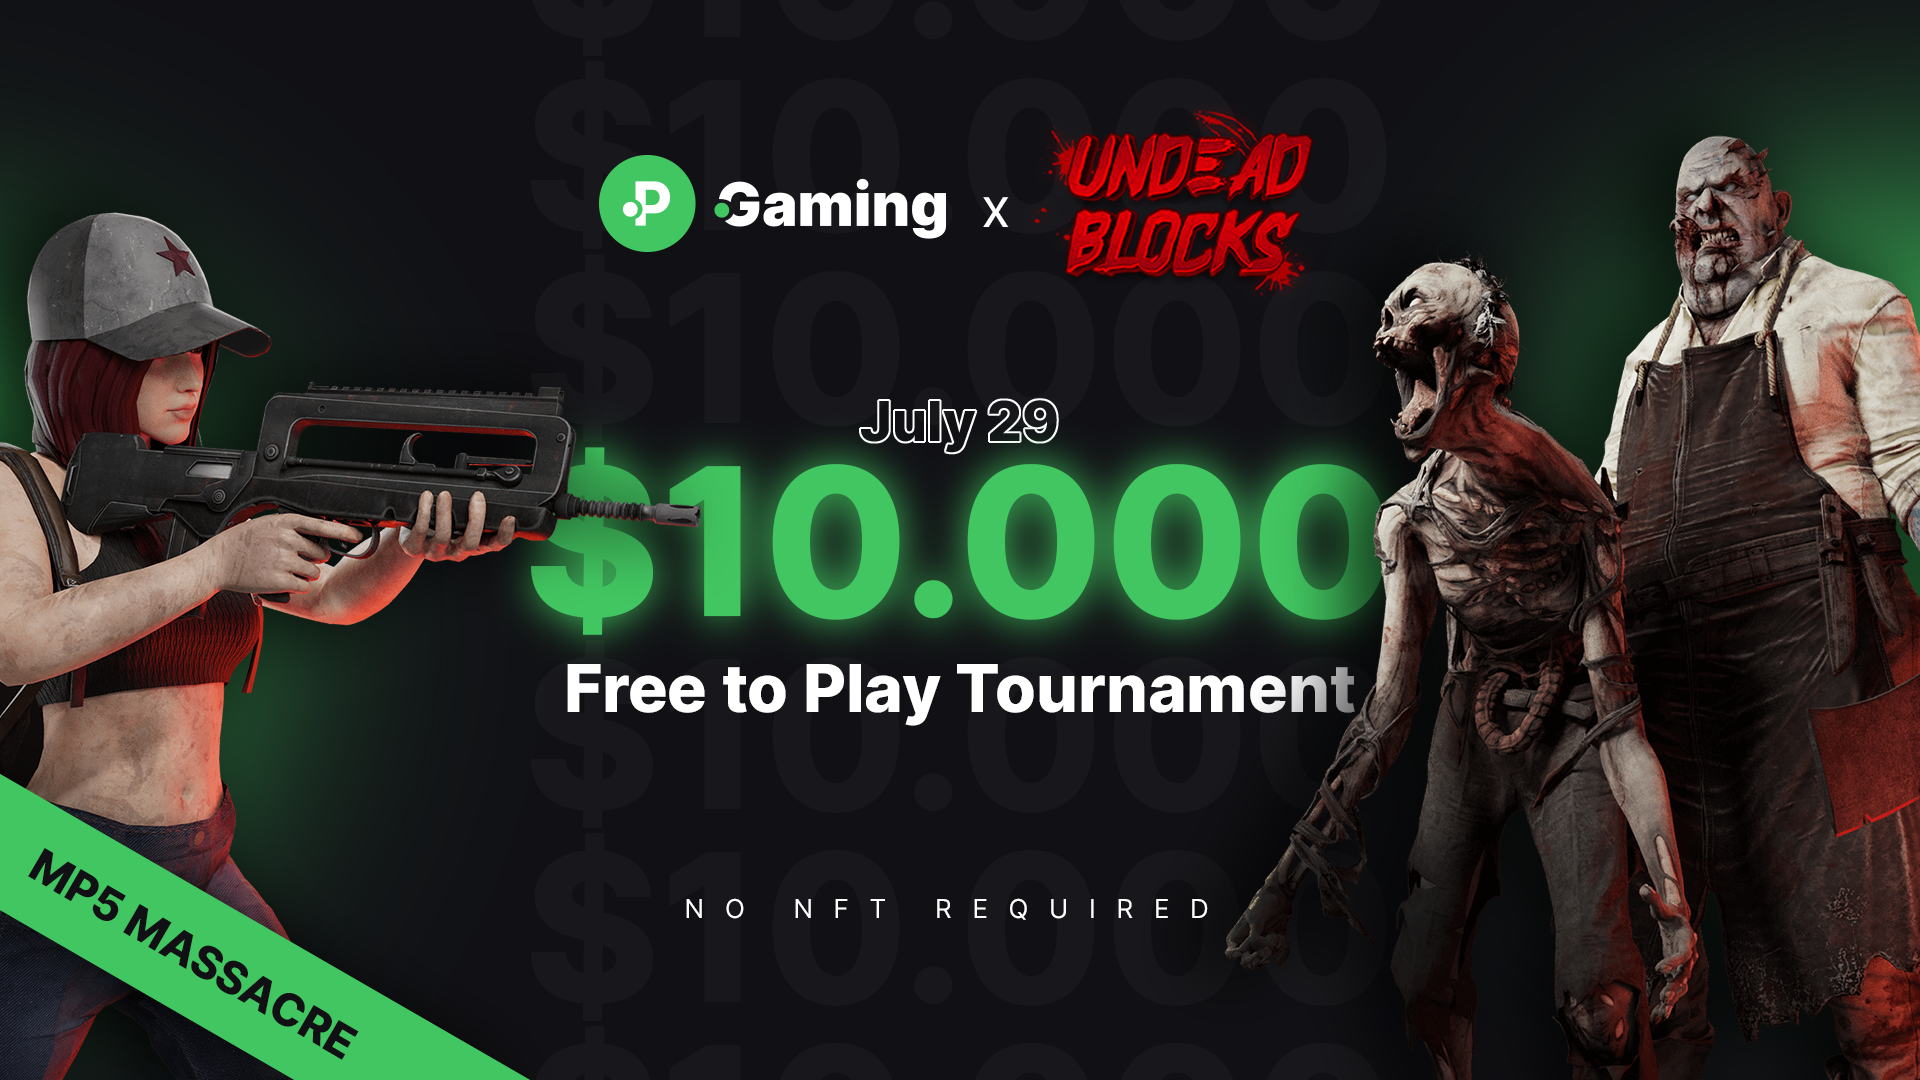 Polkastarter Gaming to Sponsor $10,000 USD Free-to-Play-and-Earn FPS Tournament With Undead Blocks